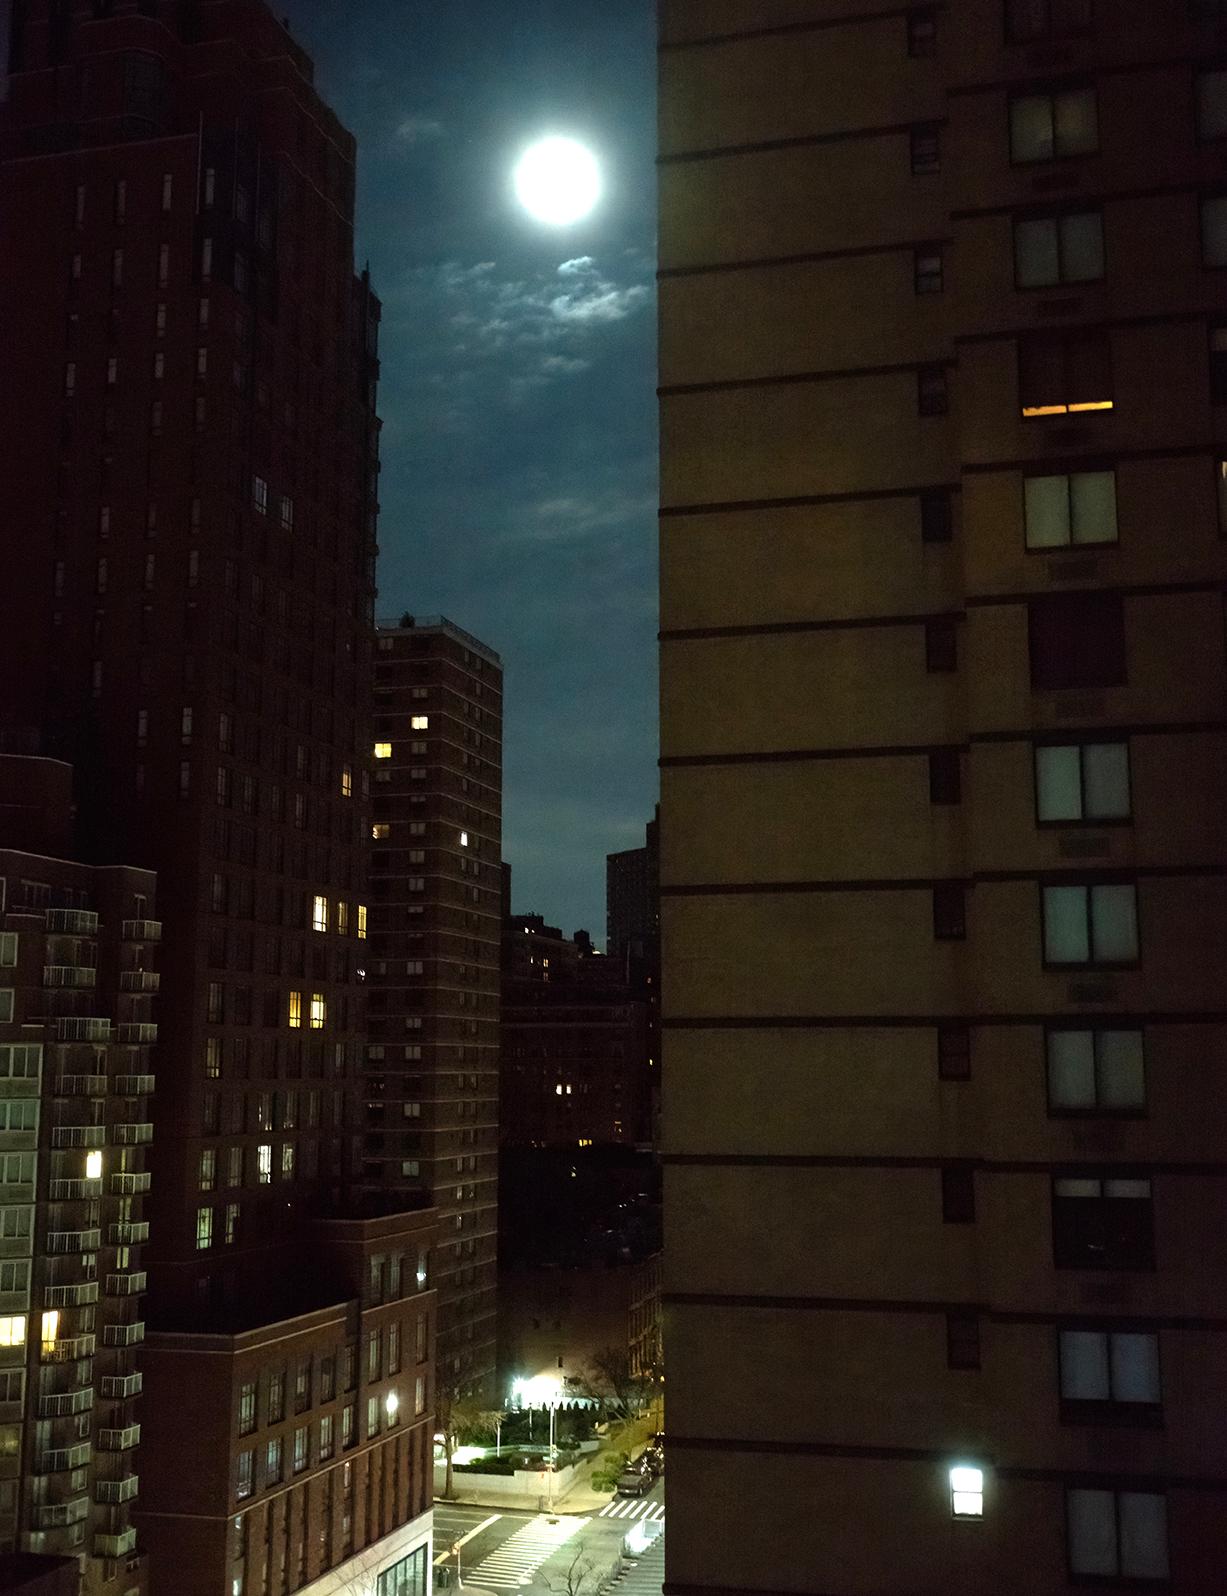 Roberta Fineberg Landscape Photograph - Wolf Moon, Color Photography of a Night of the Full Moon, New York City